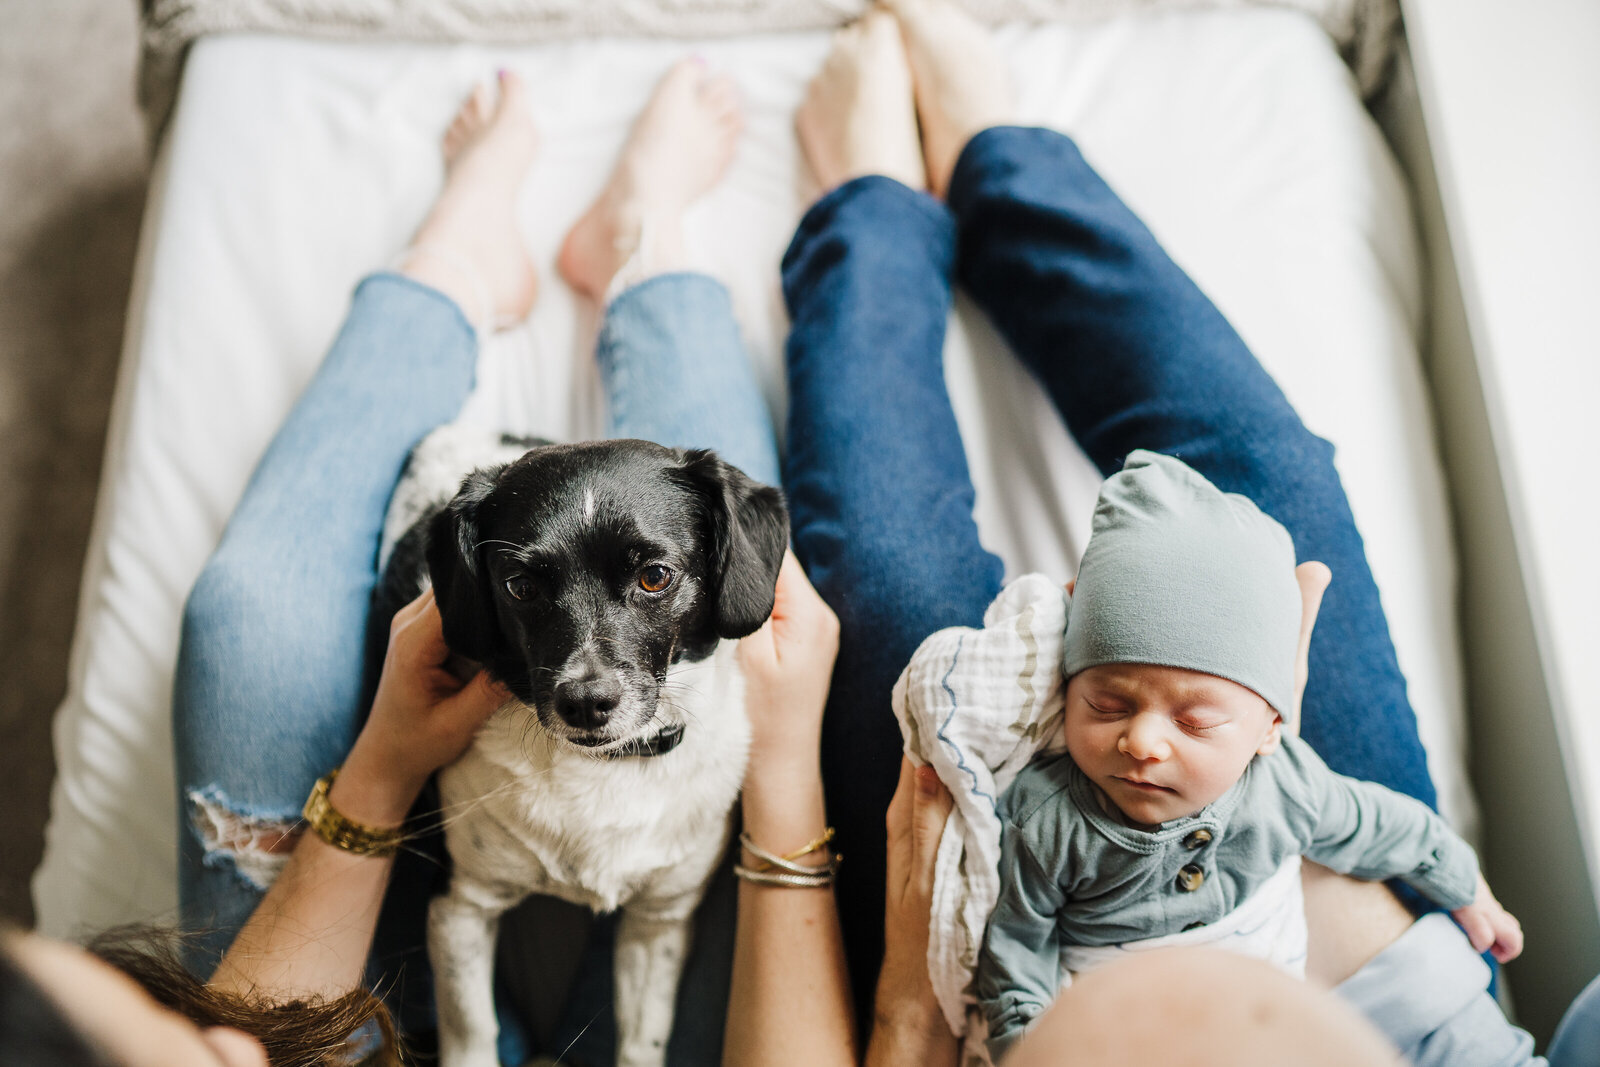 baby boy and dog look at camera in parents laps